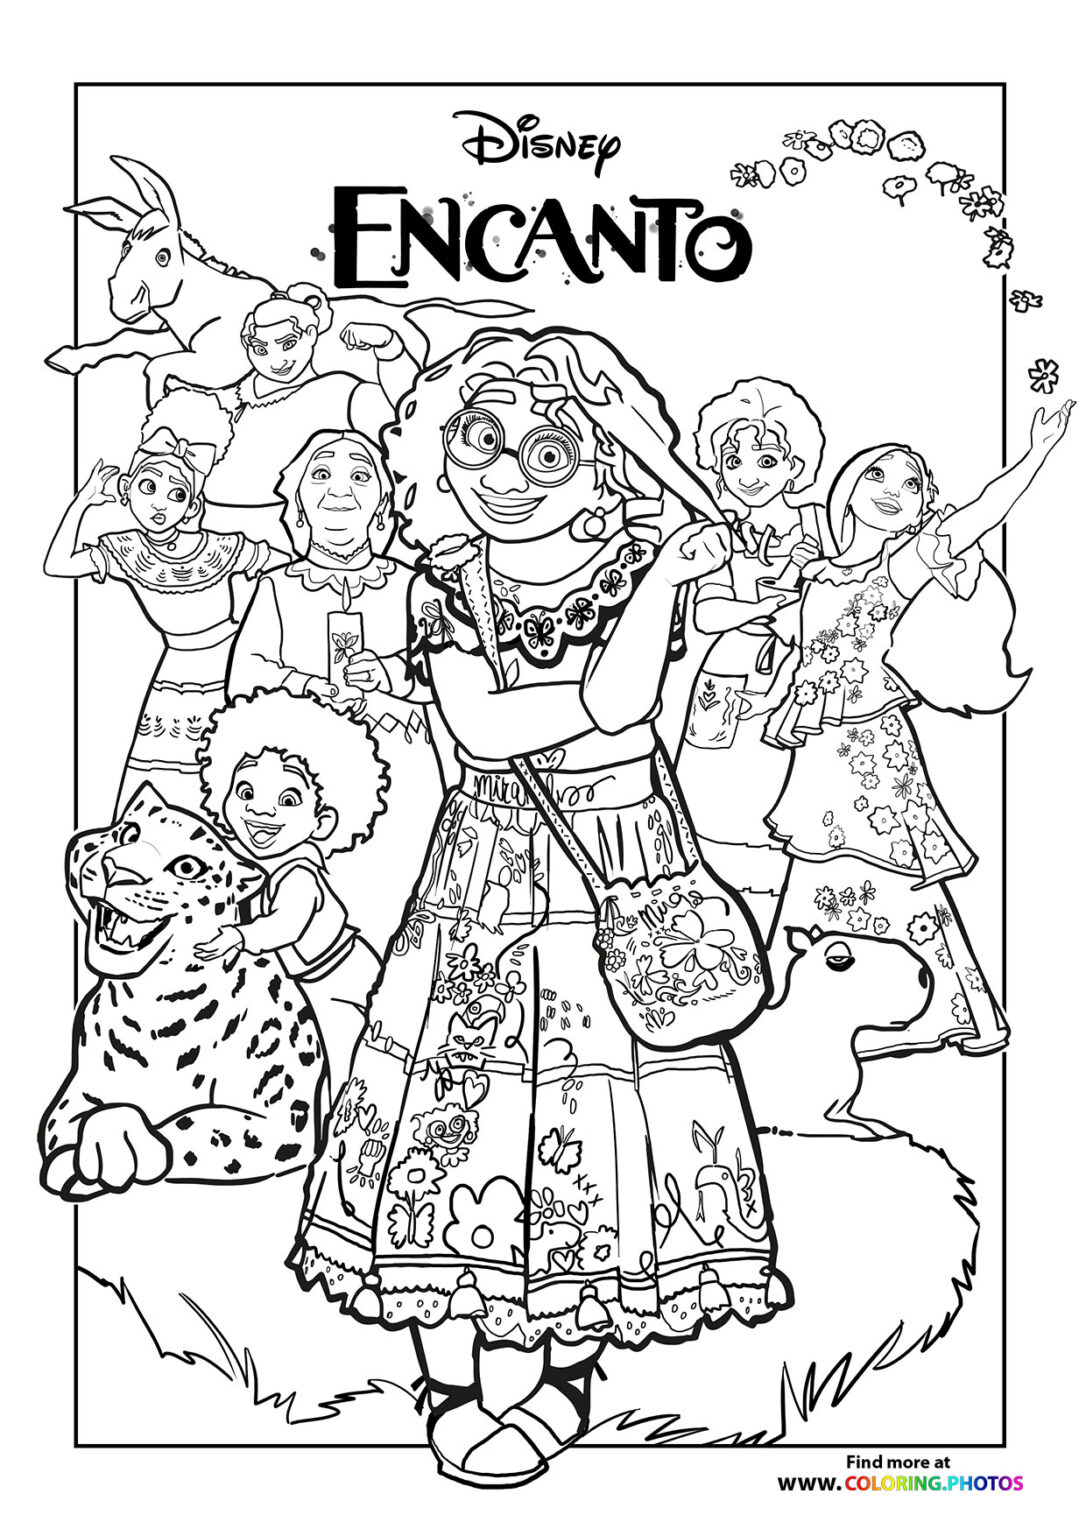 Antonio Coloring Pages for kids